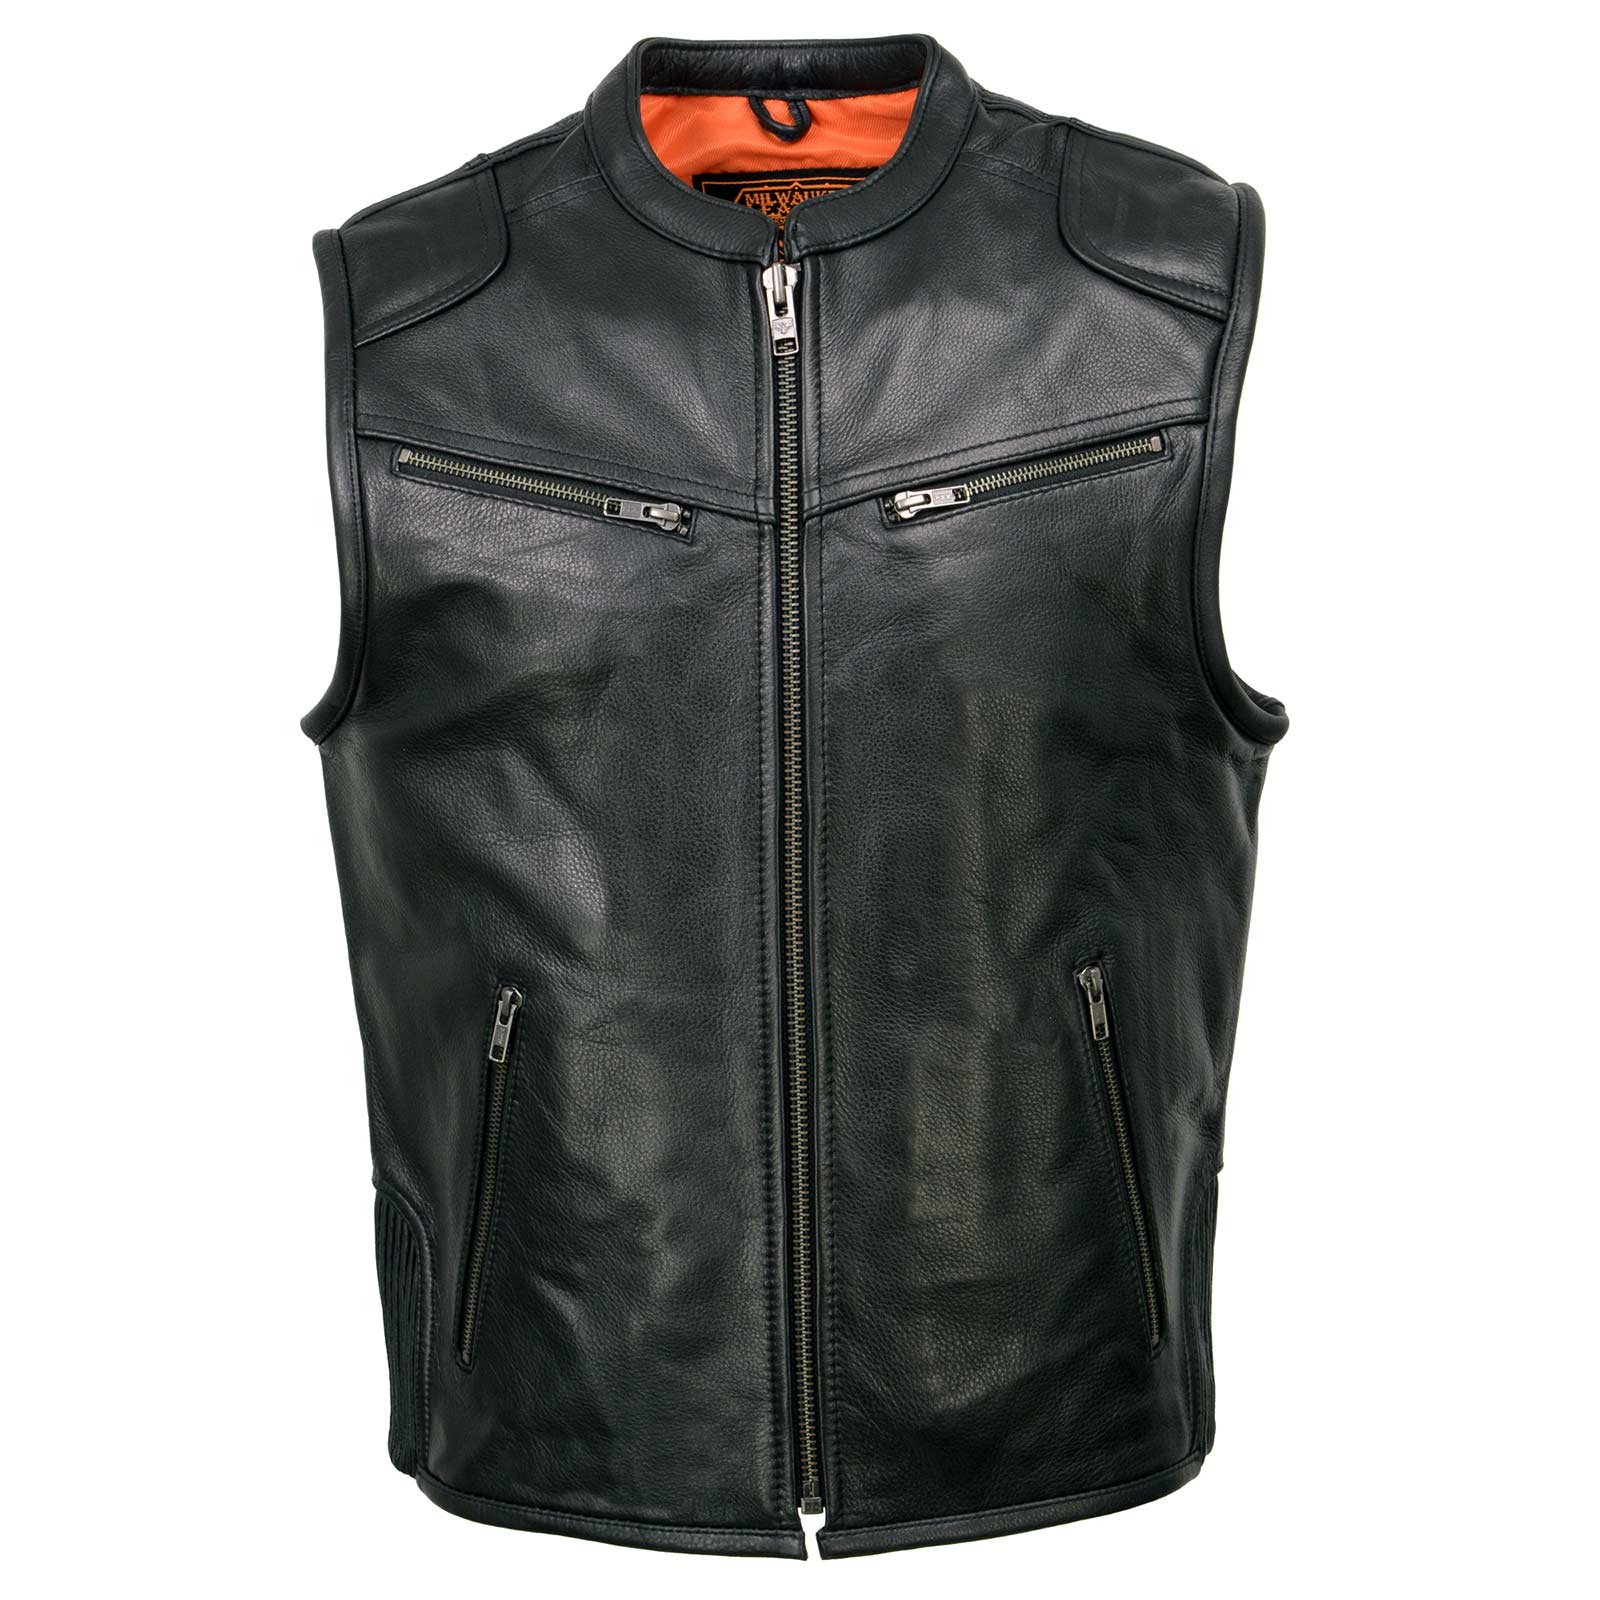 Milwaukee Leather MLM3502 Men's Black Cool-Tec Leather Vest Front Zipper Motorcycle Rider Vest with Stand-Up Collar